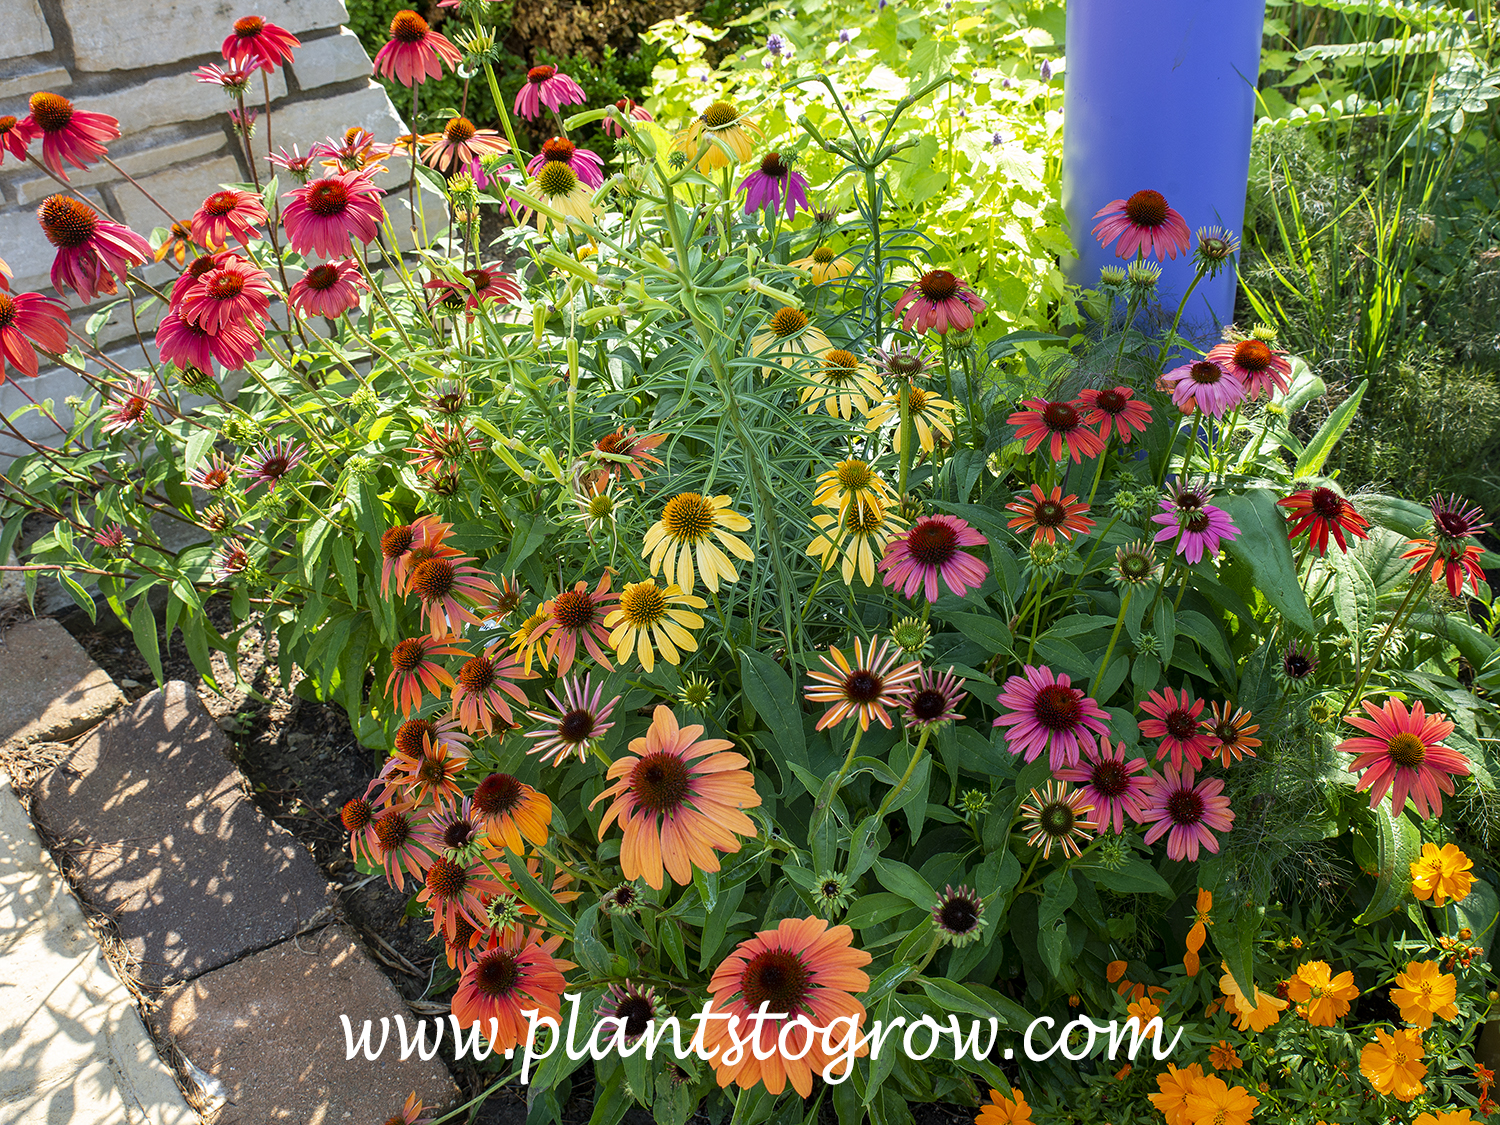 Cheyenne Spirit Coneflower (Echinacea)
A nice planting showing many of this cultivars colors.